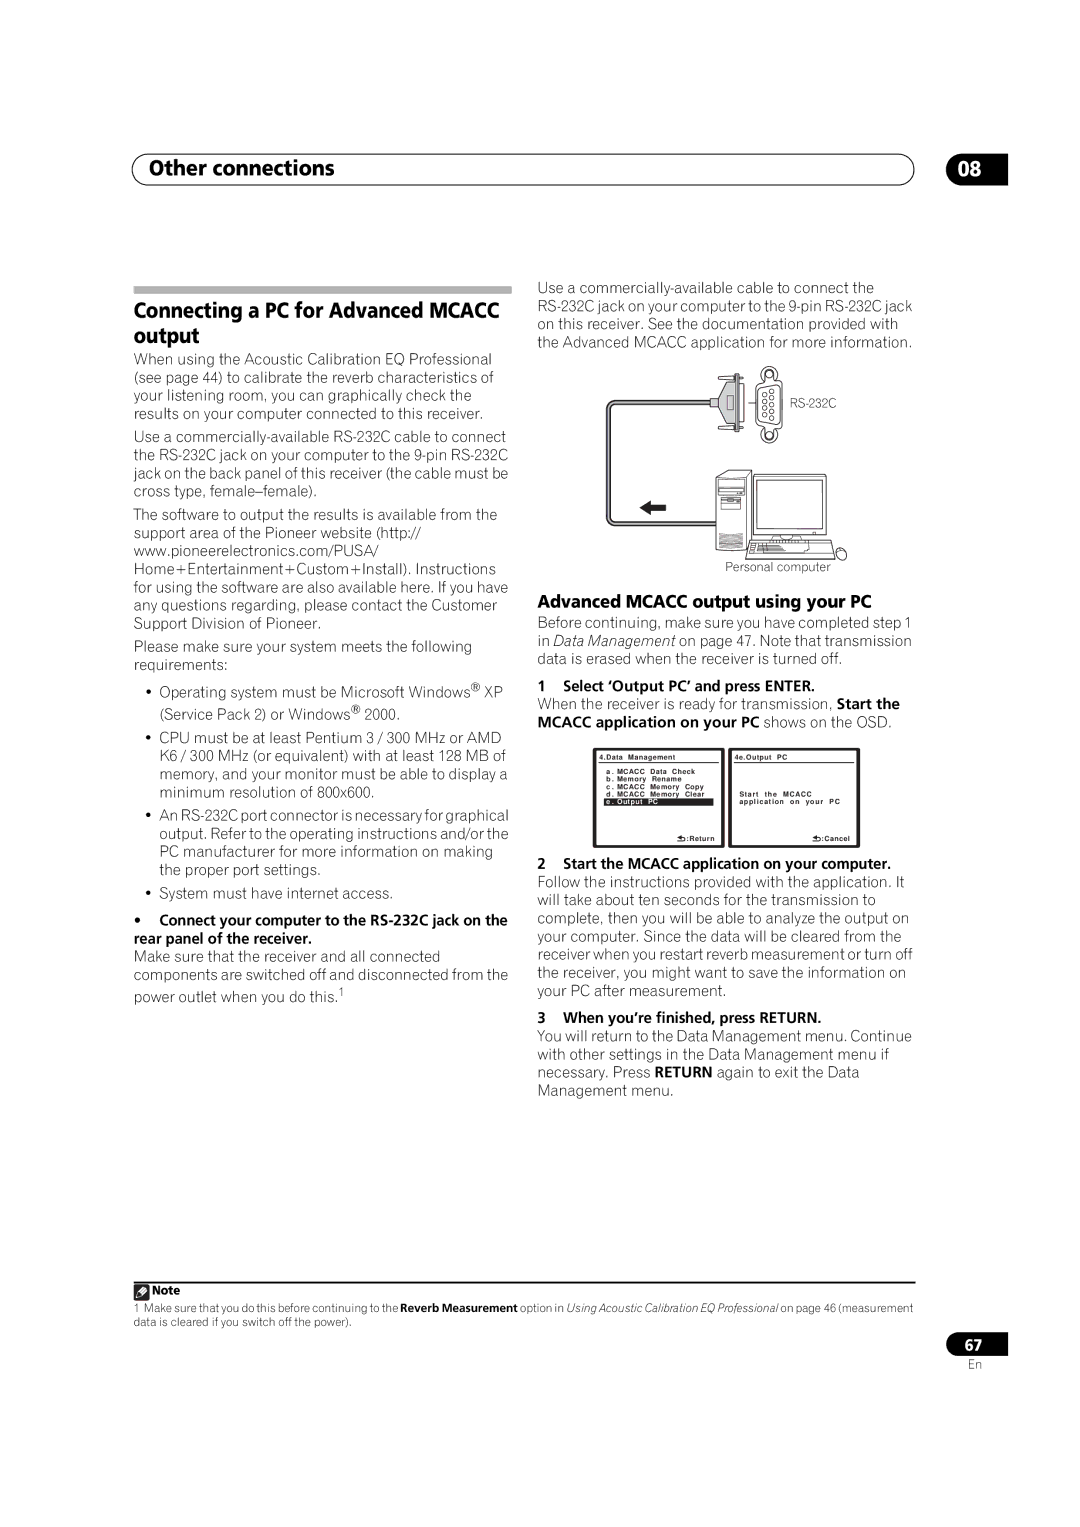 Pioneer VSX-03TXH manual Other connections Connecting a PC for Advanced Mcacc output, Advanced Mcacc output using your PC 